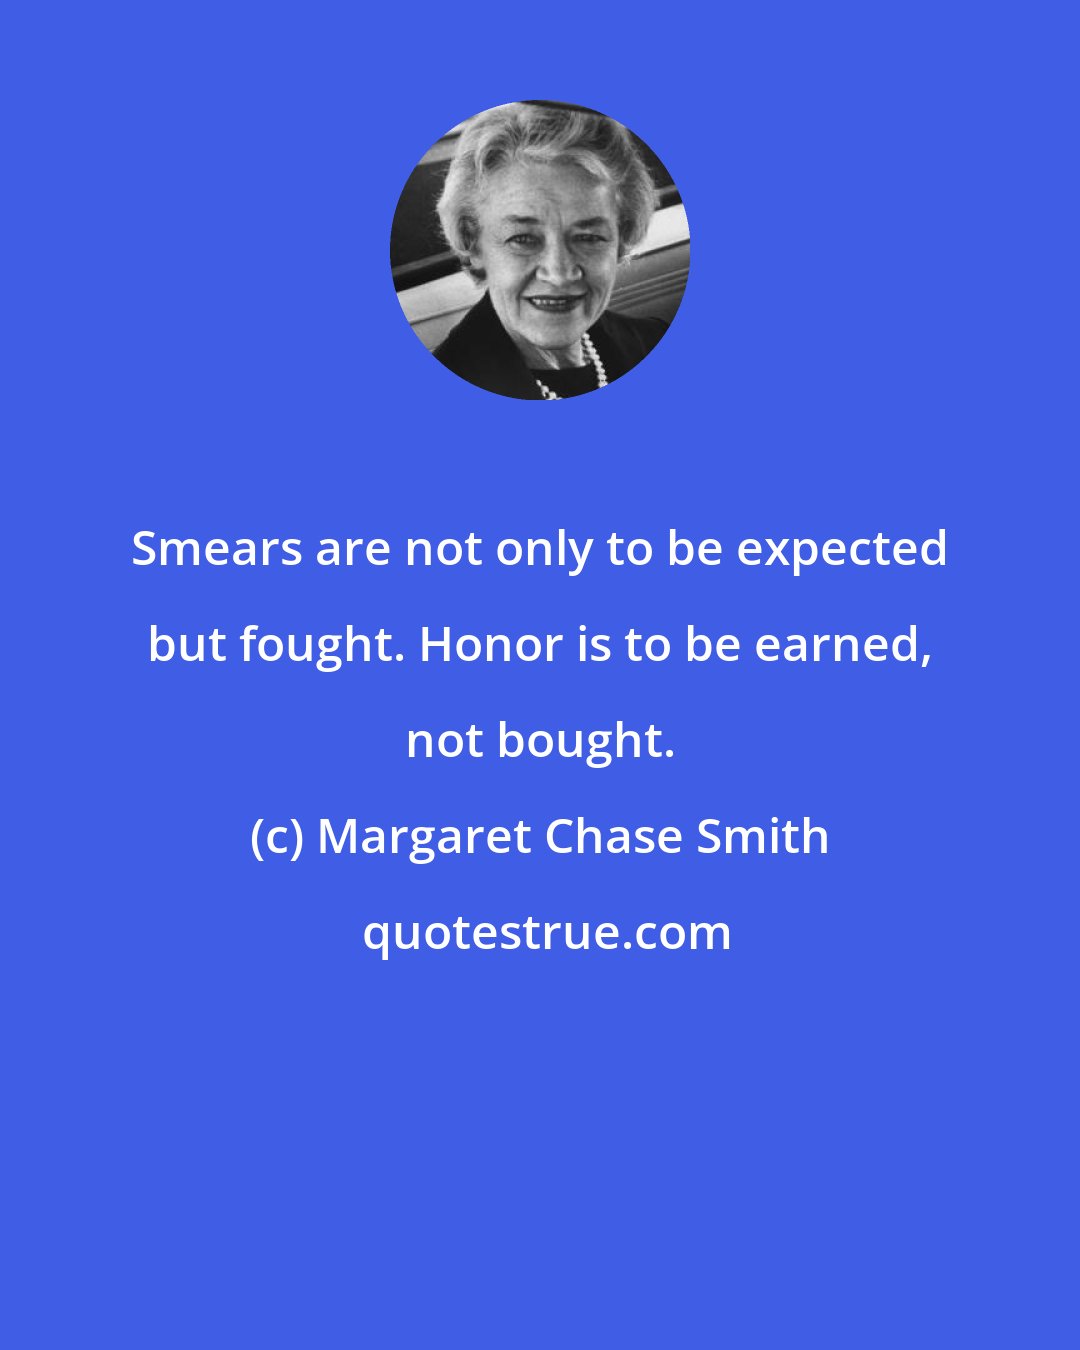 Margaret Chase Smith: Smears are not only to be expected but fought. Honor is to be earned, not bought.